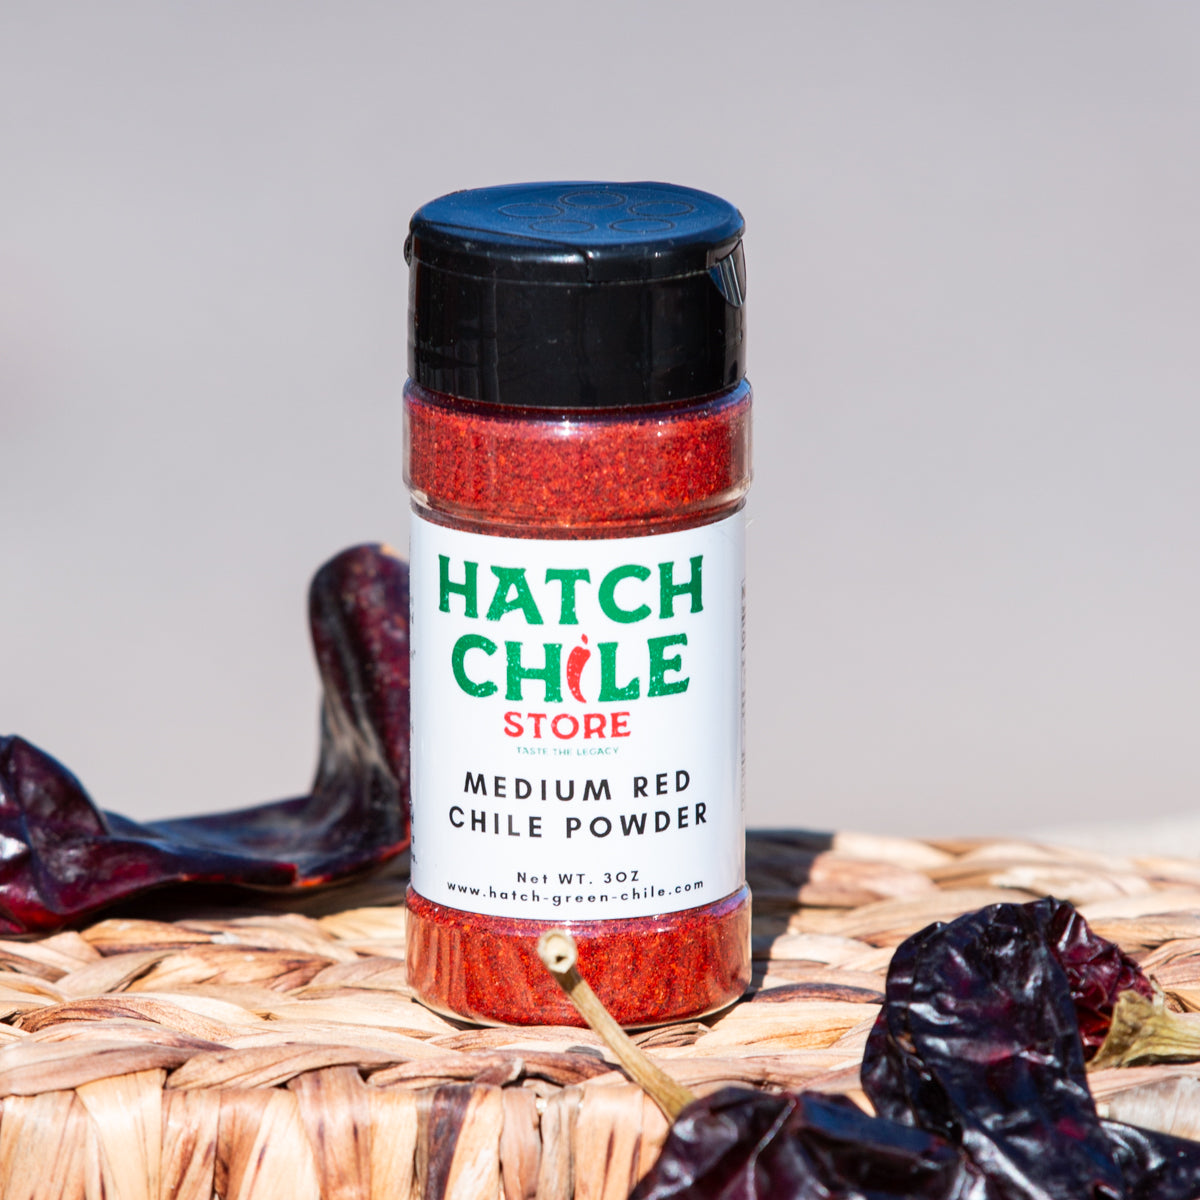 A container of Red Chile Powder, positioned in the center, surrounded by sun-dried red chilies on a woven surface. The background is plain, enhancing the vivid colors.